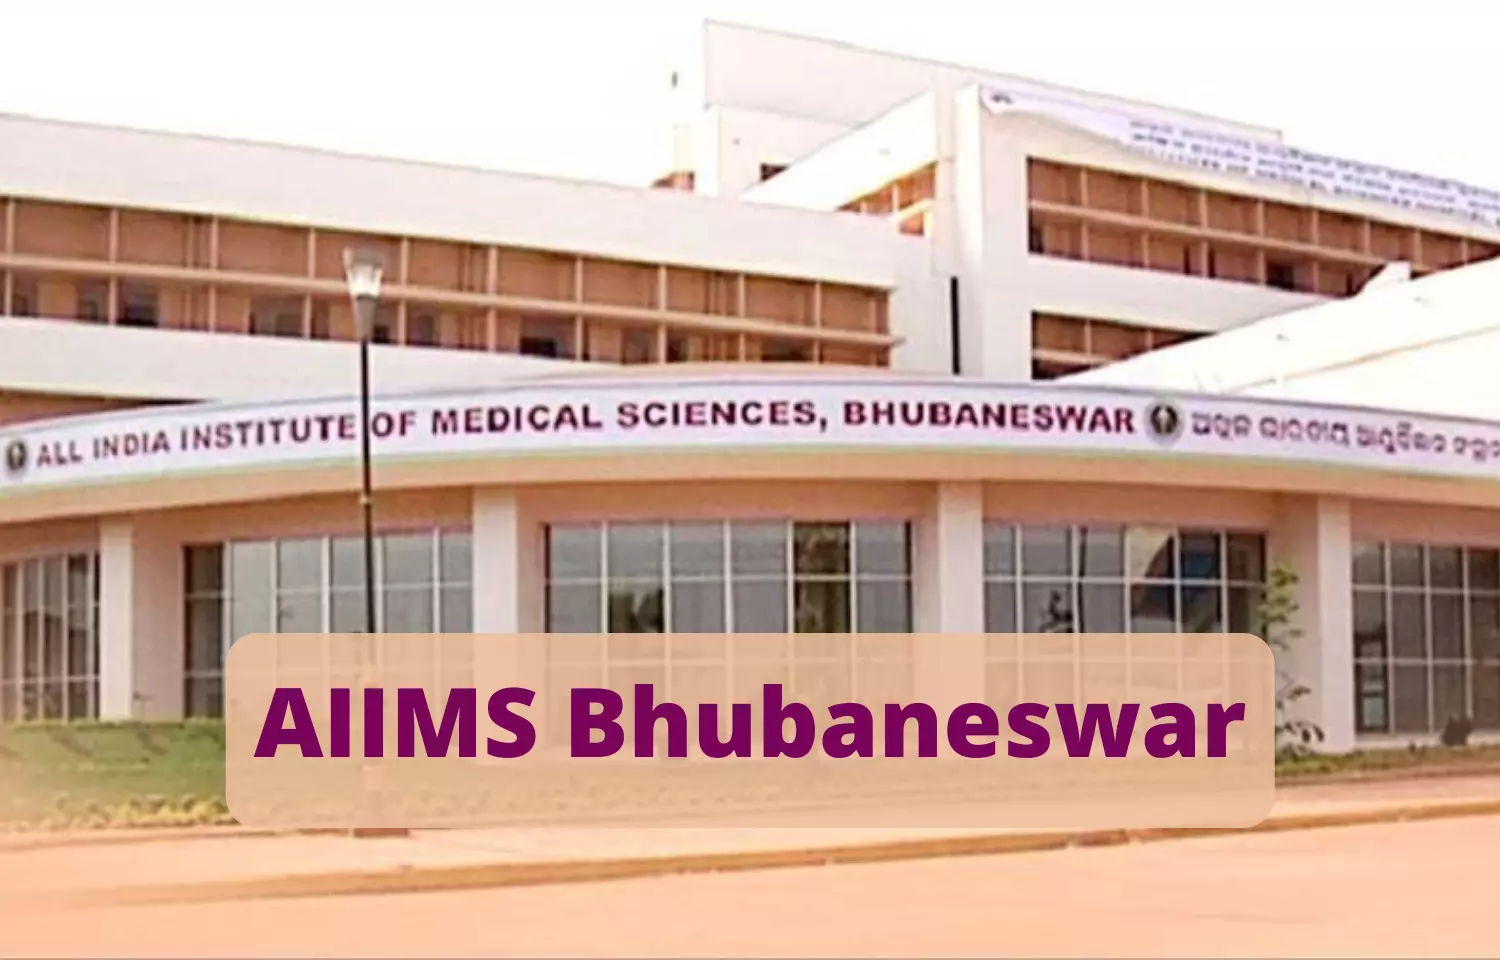 AIIMS Bhubaneswar to conduct study to control snakebite deaths